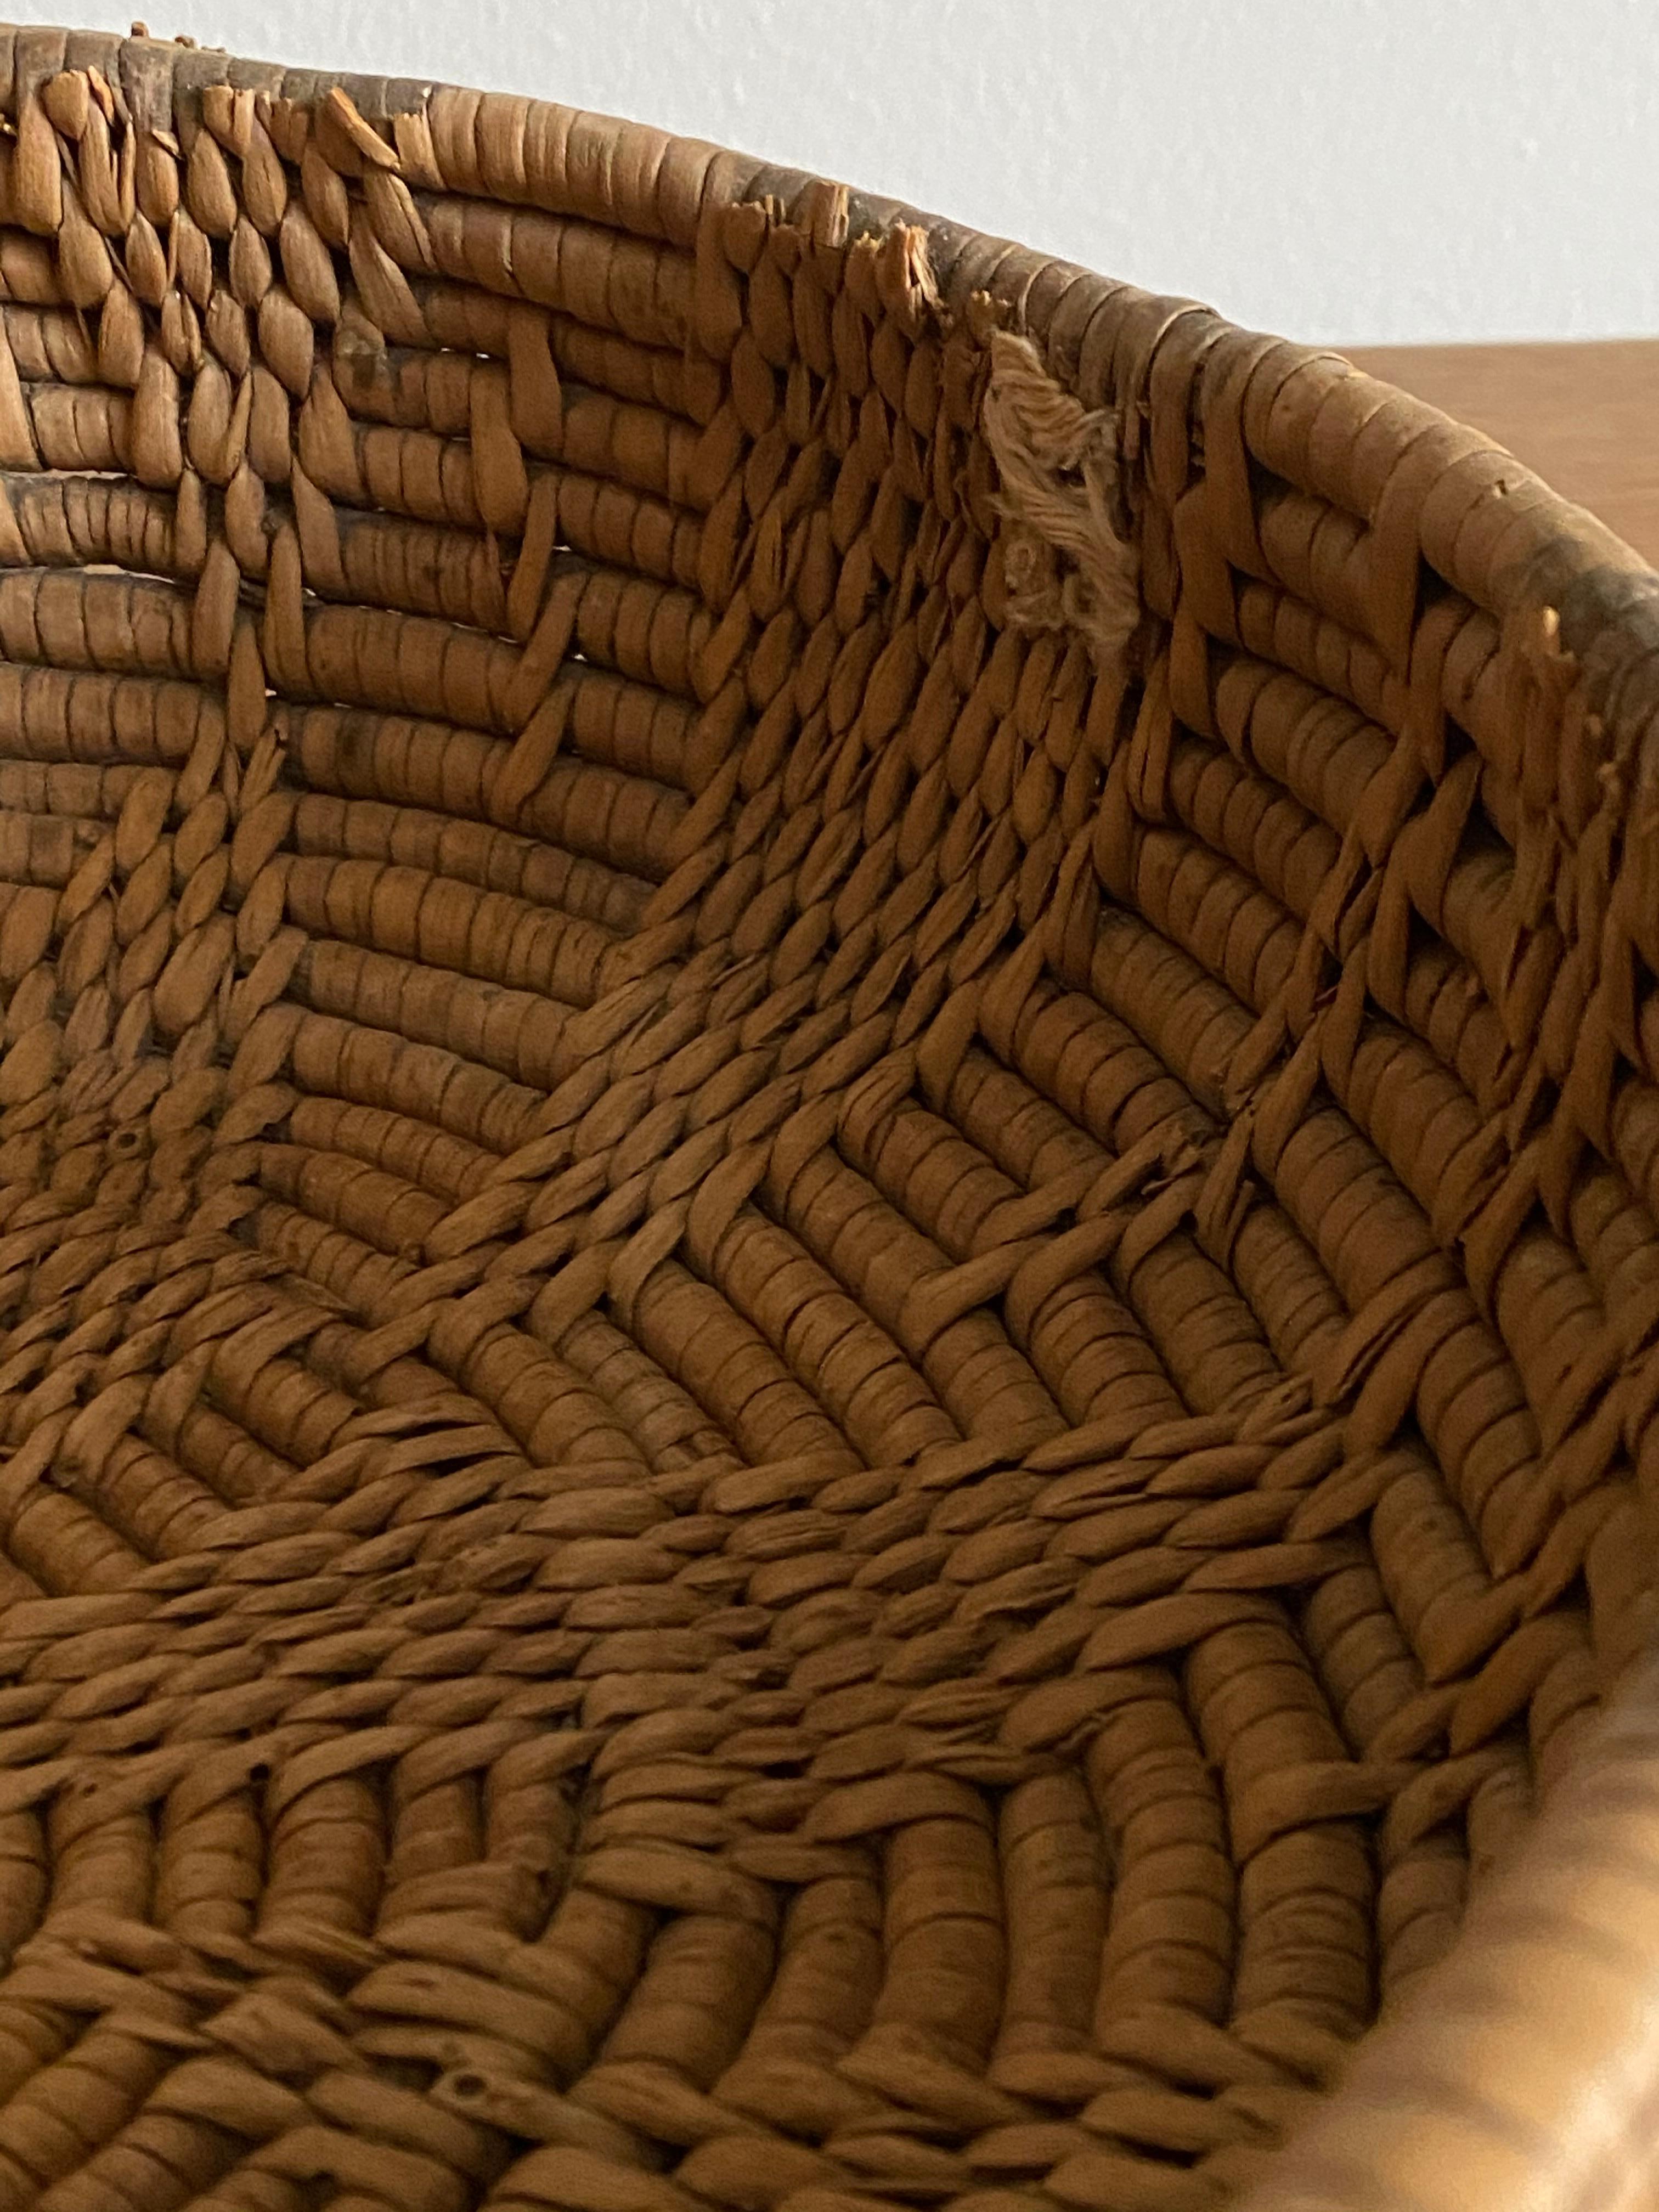 Wood Swedish Craft, Basket or Bowl, Woven Fir Root, Sweden, 19th Century